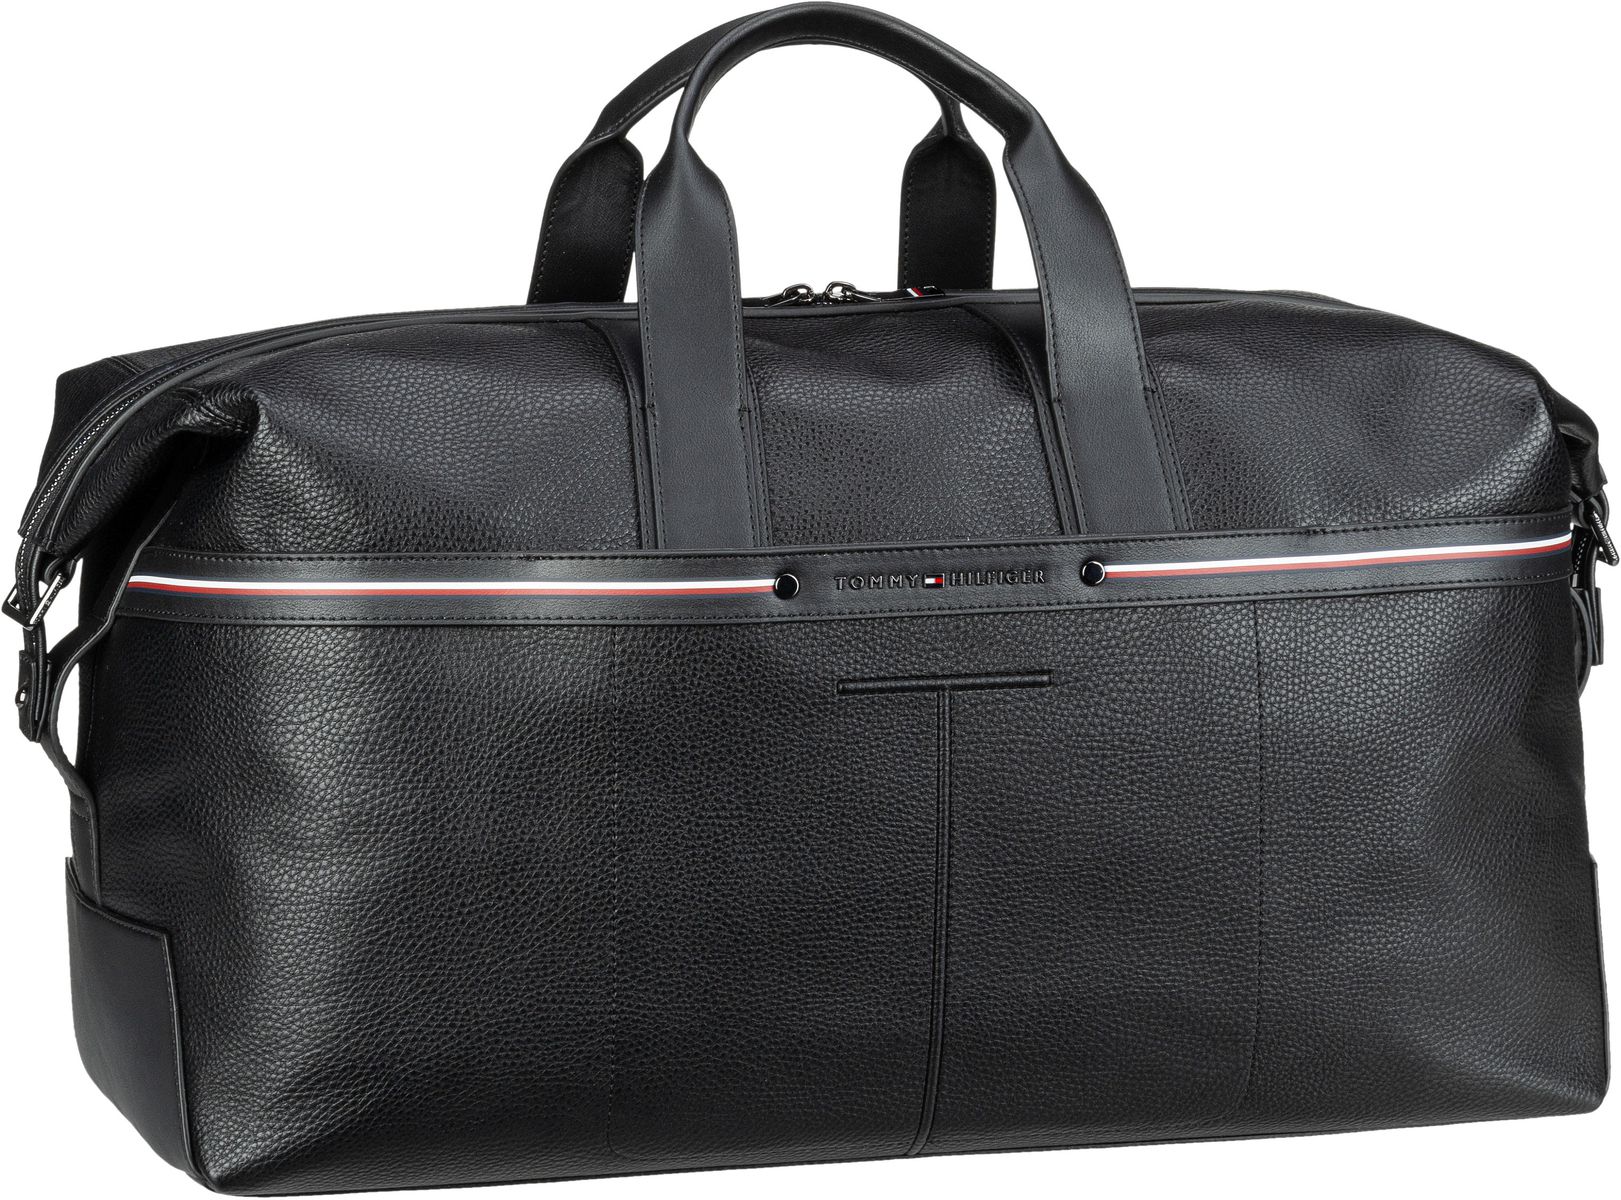 Tommy Hilfiger TH Central Duffle SP23 - Black